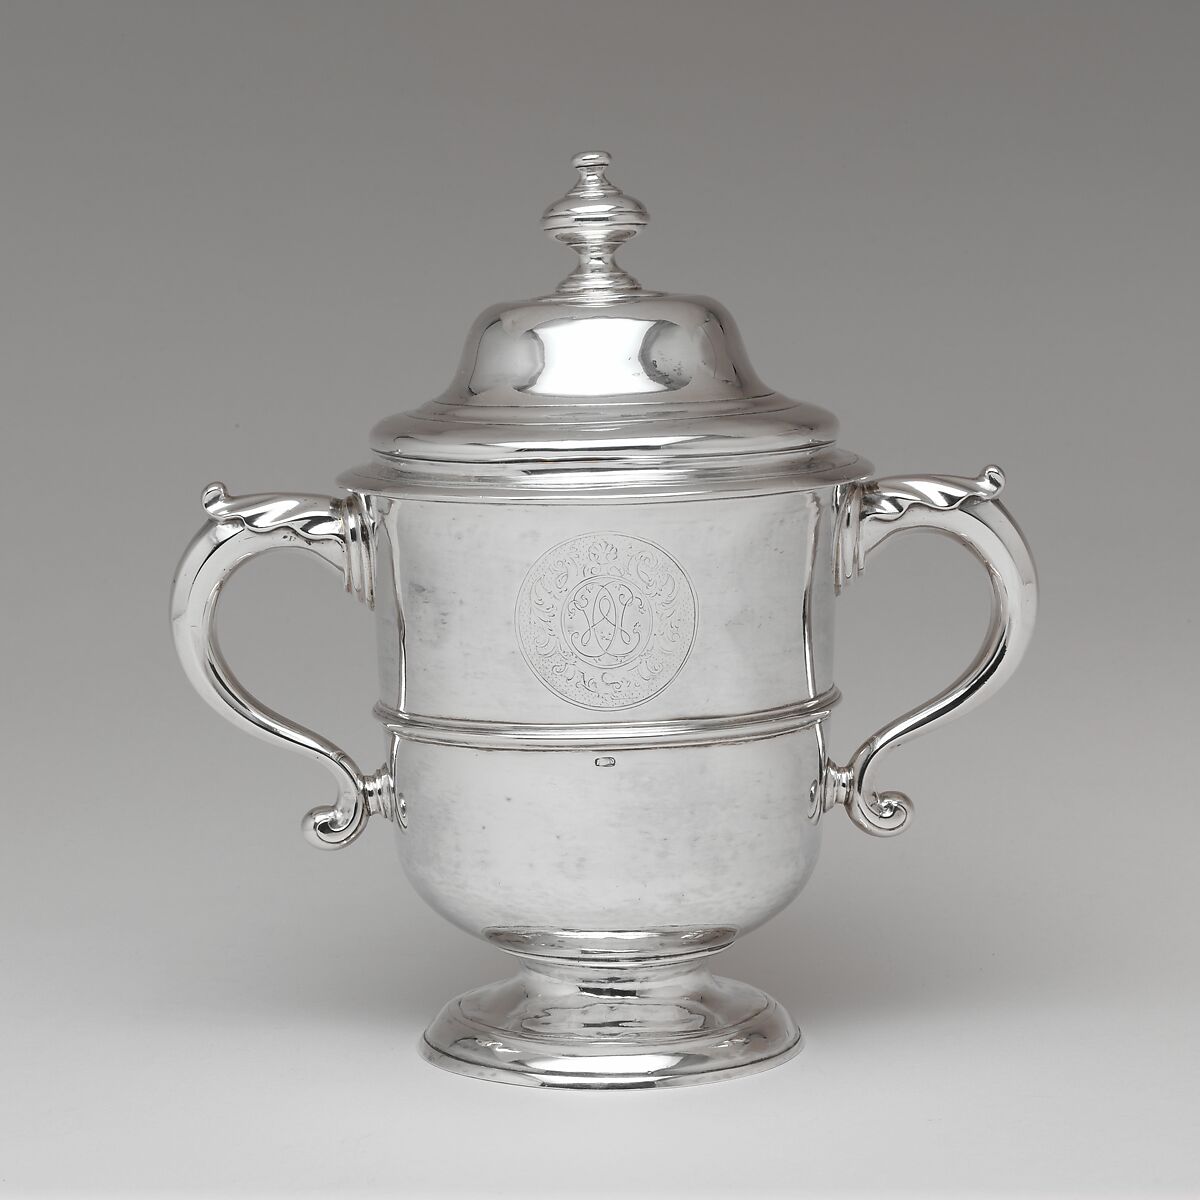 Two-Handled Cup and Cover, Jacob Hurd (American, Boston, Massachusetts 1702/3–1758 Boston, Massachusetts), Silver, American 